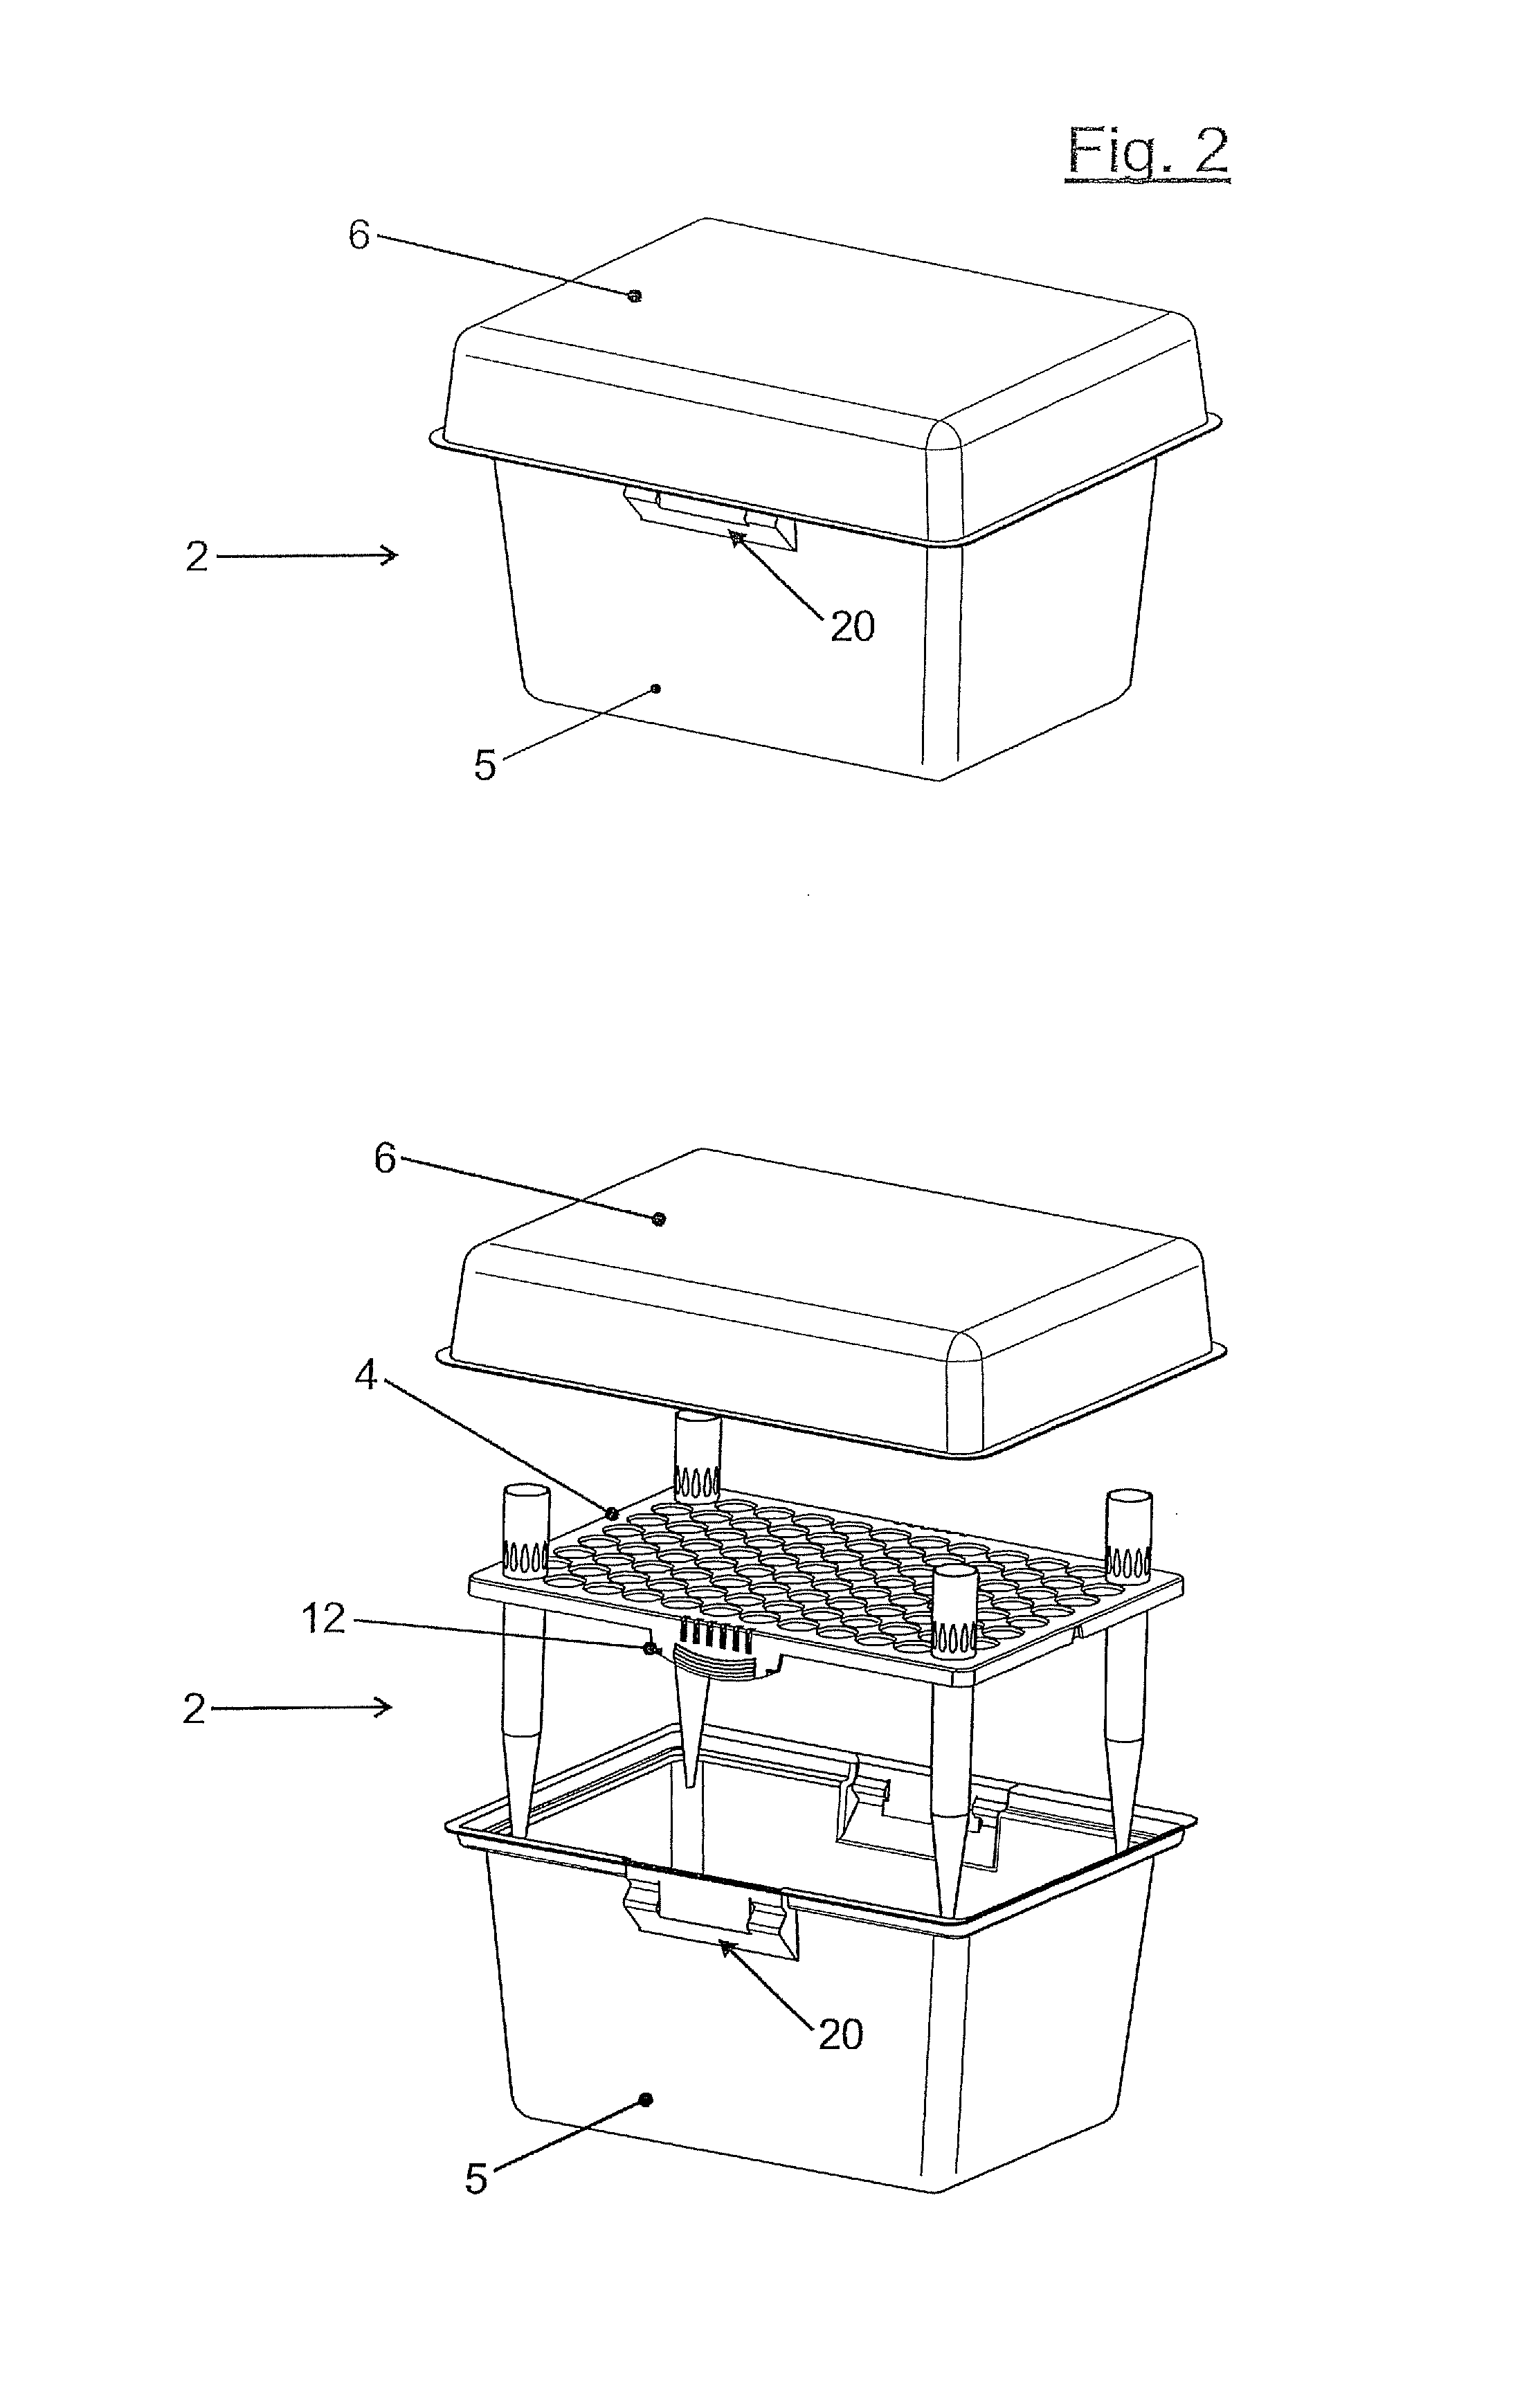 Device for providing pipette tips